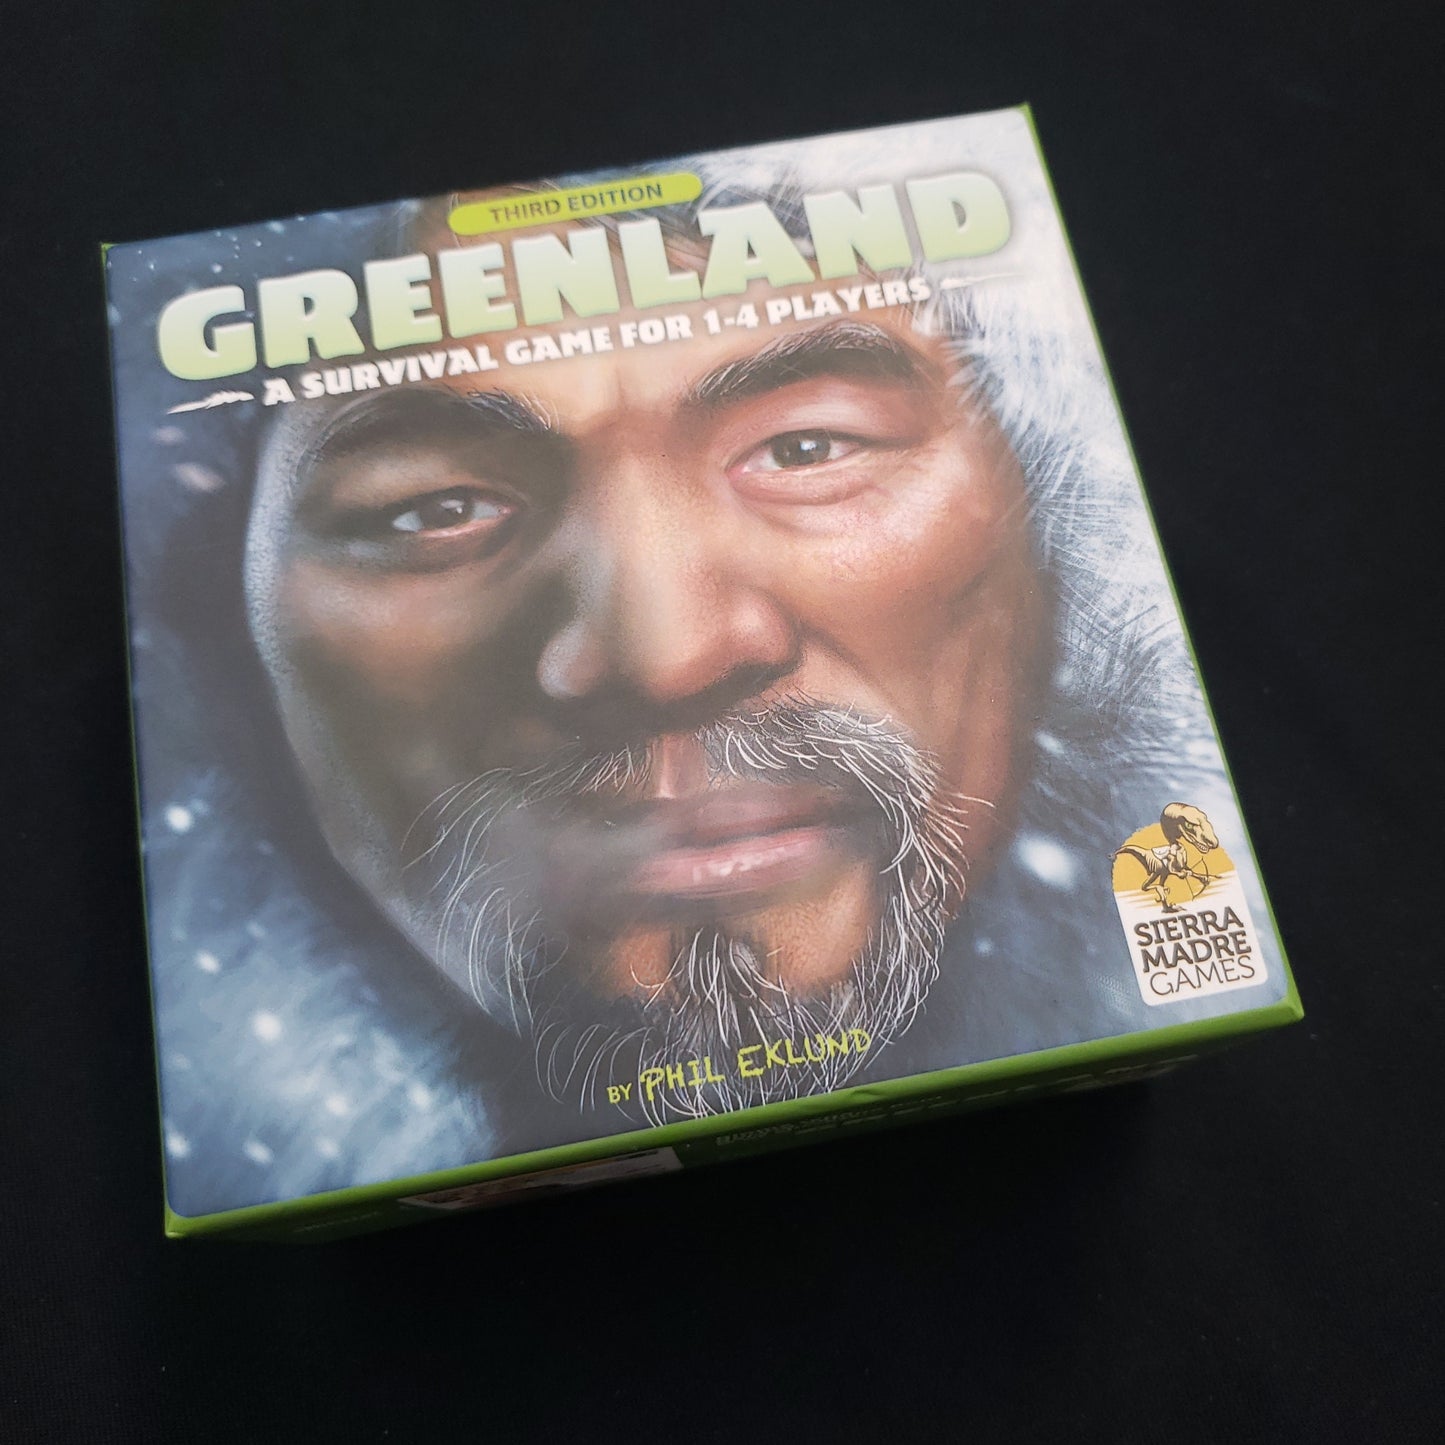 Image shows the front cover of the box of the Greenland board game